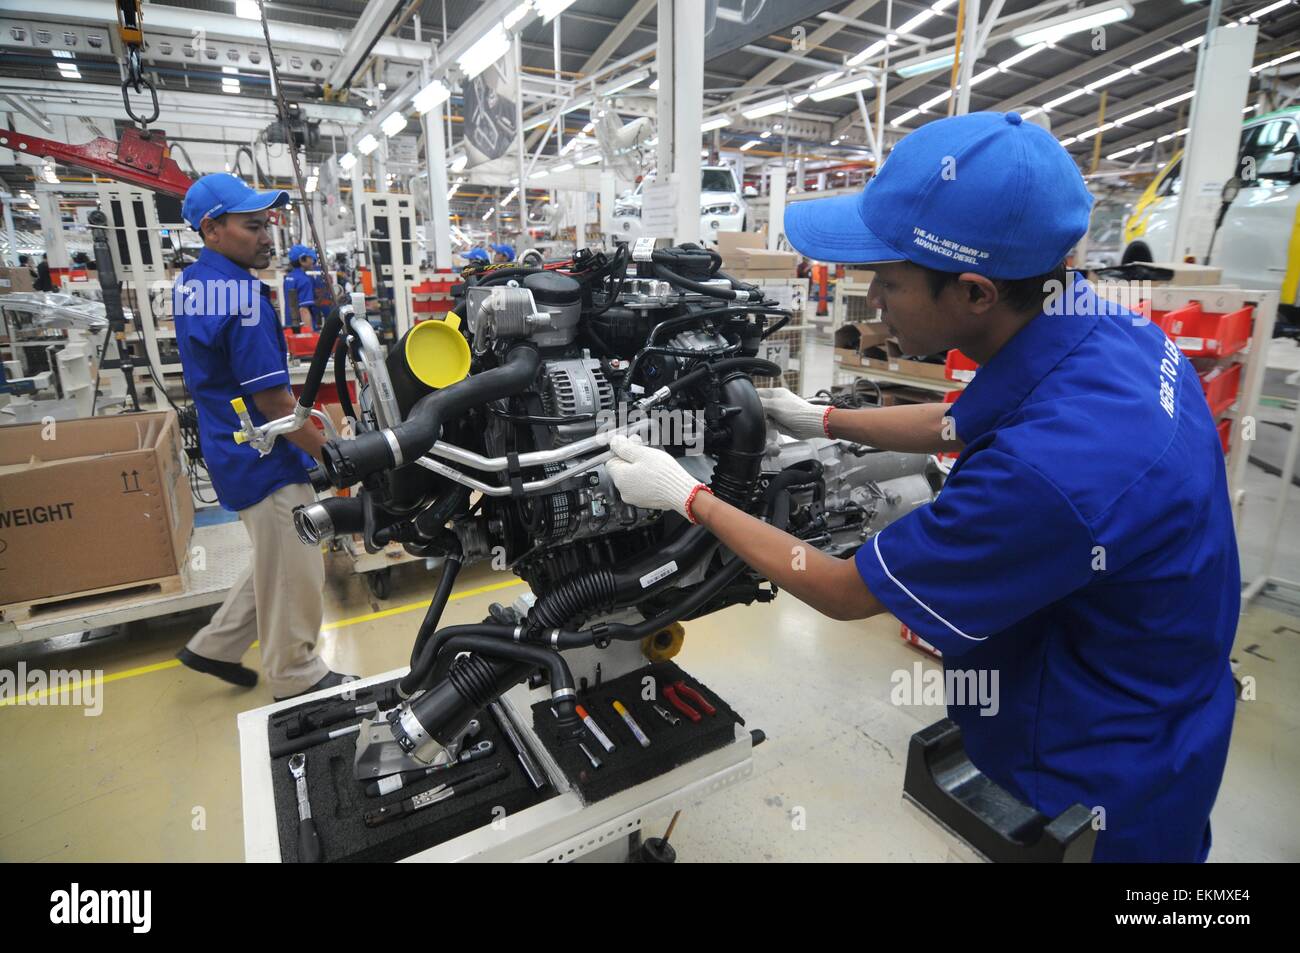 Jakarta, Indonesia. 10th Apr, 2015. JAKARTA, INDONESIA - APRIL 13 : Workers assemble the third generation of BMW X5 Advance Diesel automobile on the production line at the Bayerische Motoren Werke (BMW) factory on April 10, 2015 in Jakarta, Indonesia. © Sijori Images/ZUMA Wire/Alamy Live News Stock Photo